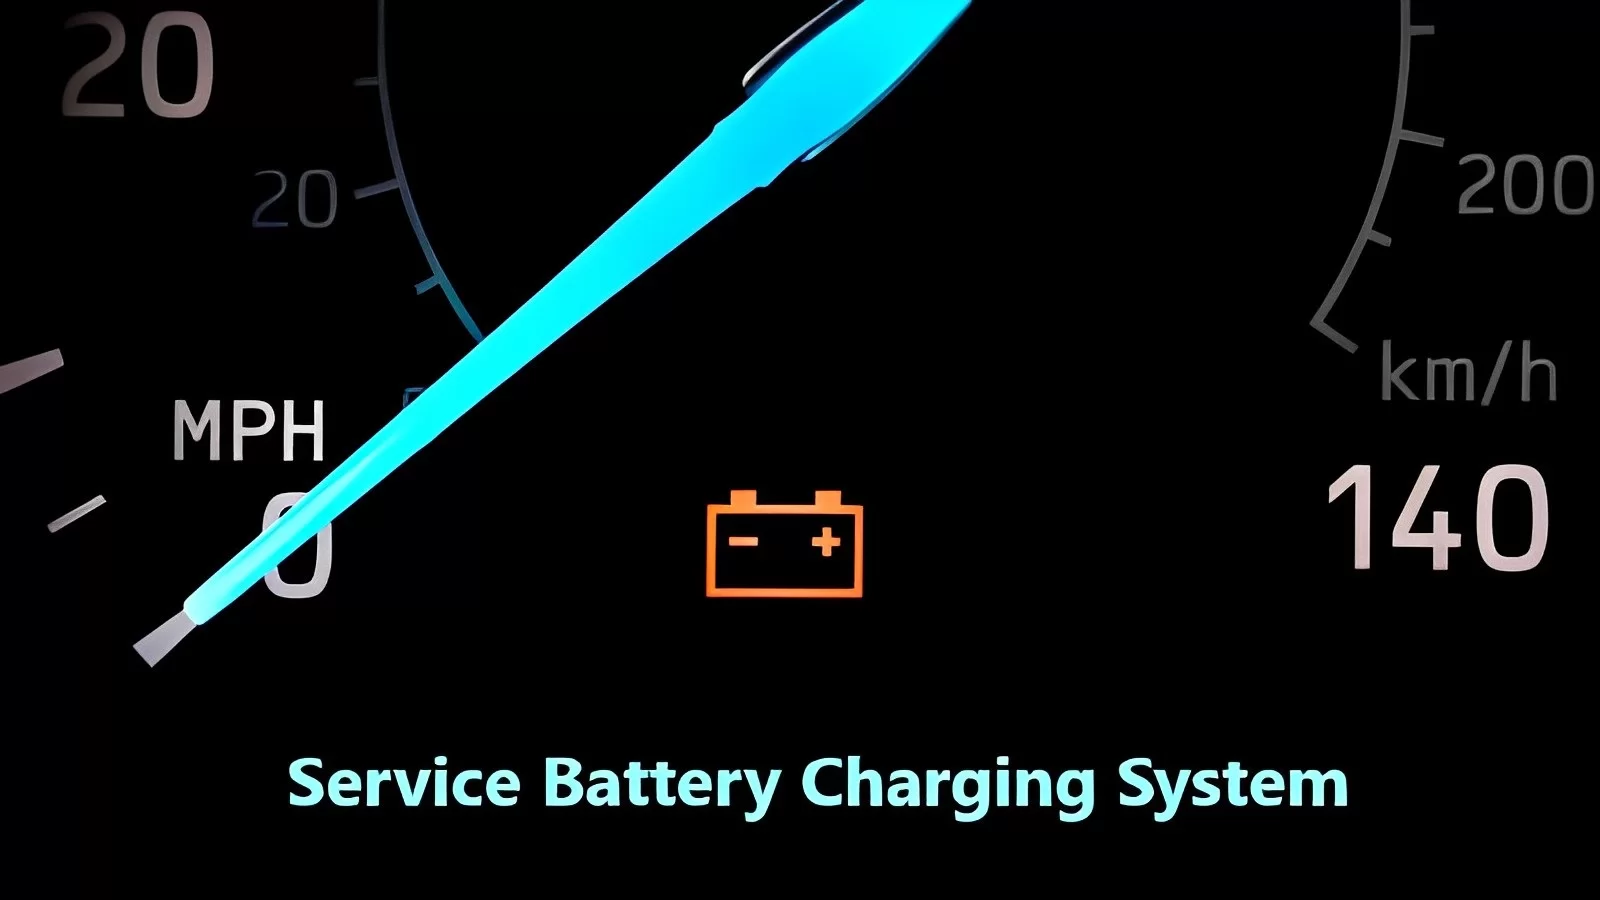 What Does ‘Service Battery Charging System’ Mean?